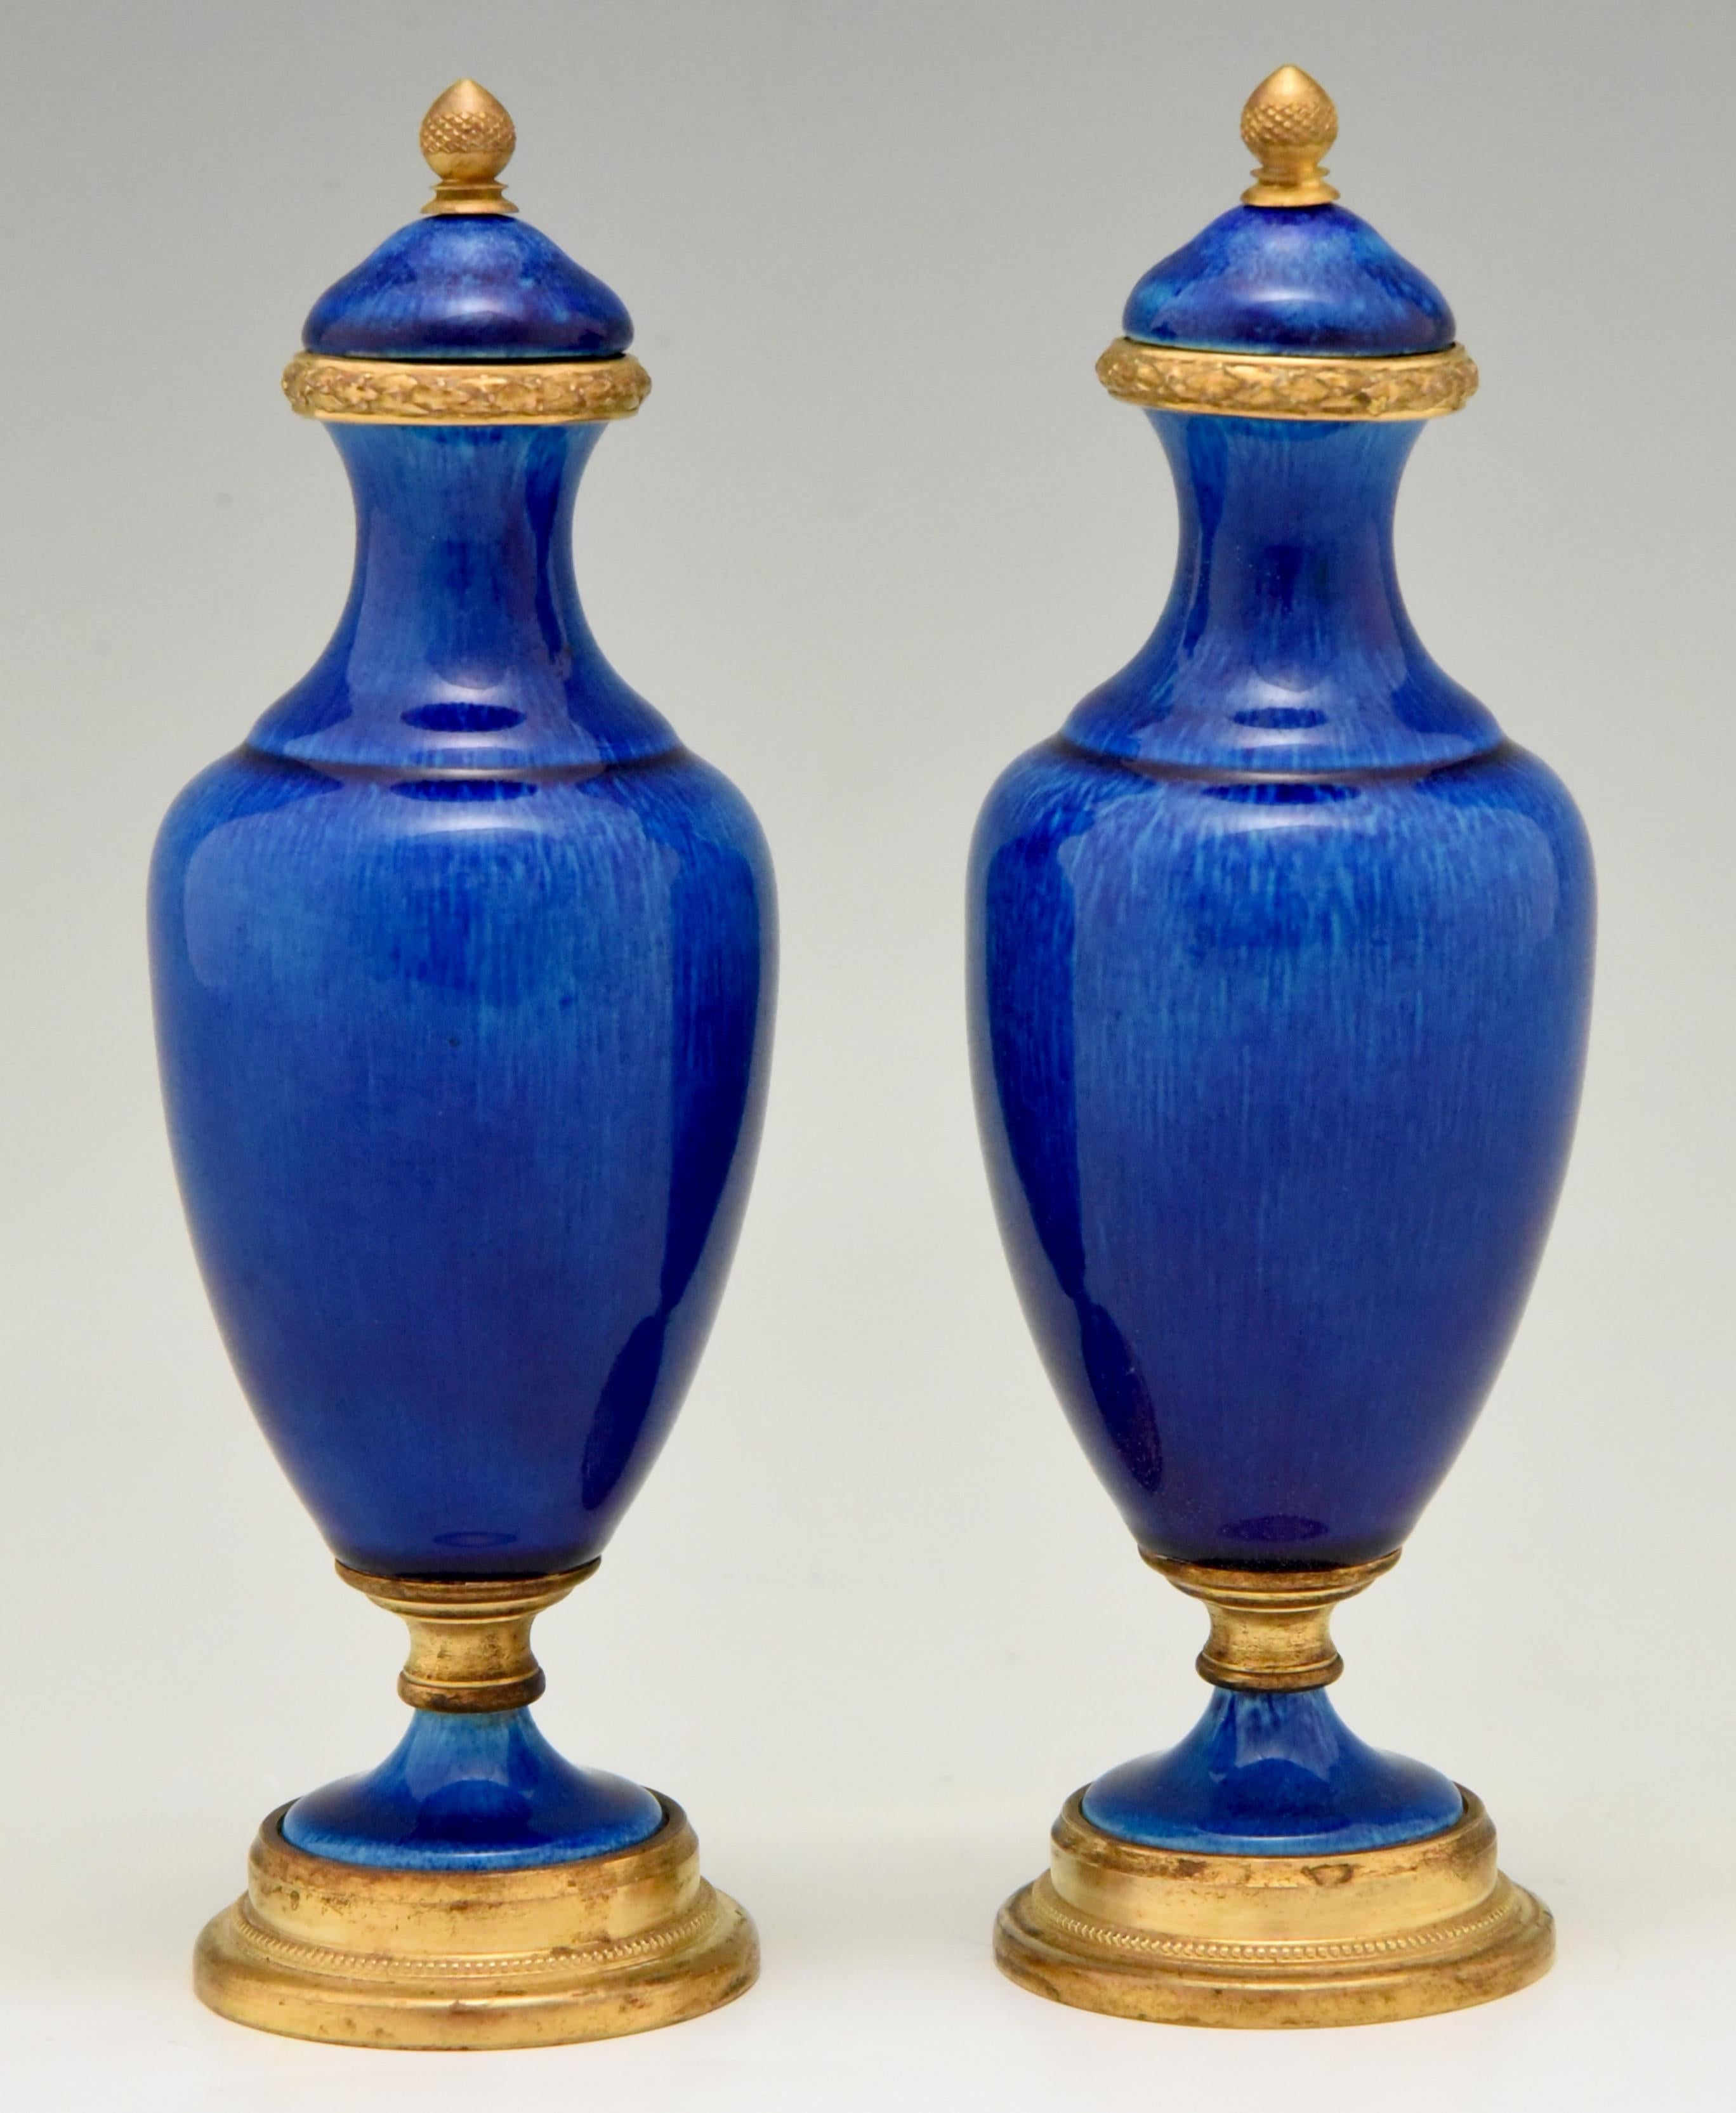 French Pair of Blue Ceramic and Bronze Vases or Urns Paul Milet for Sèvres, circa 1900